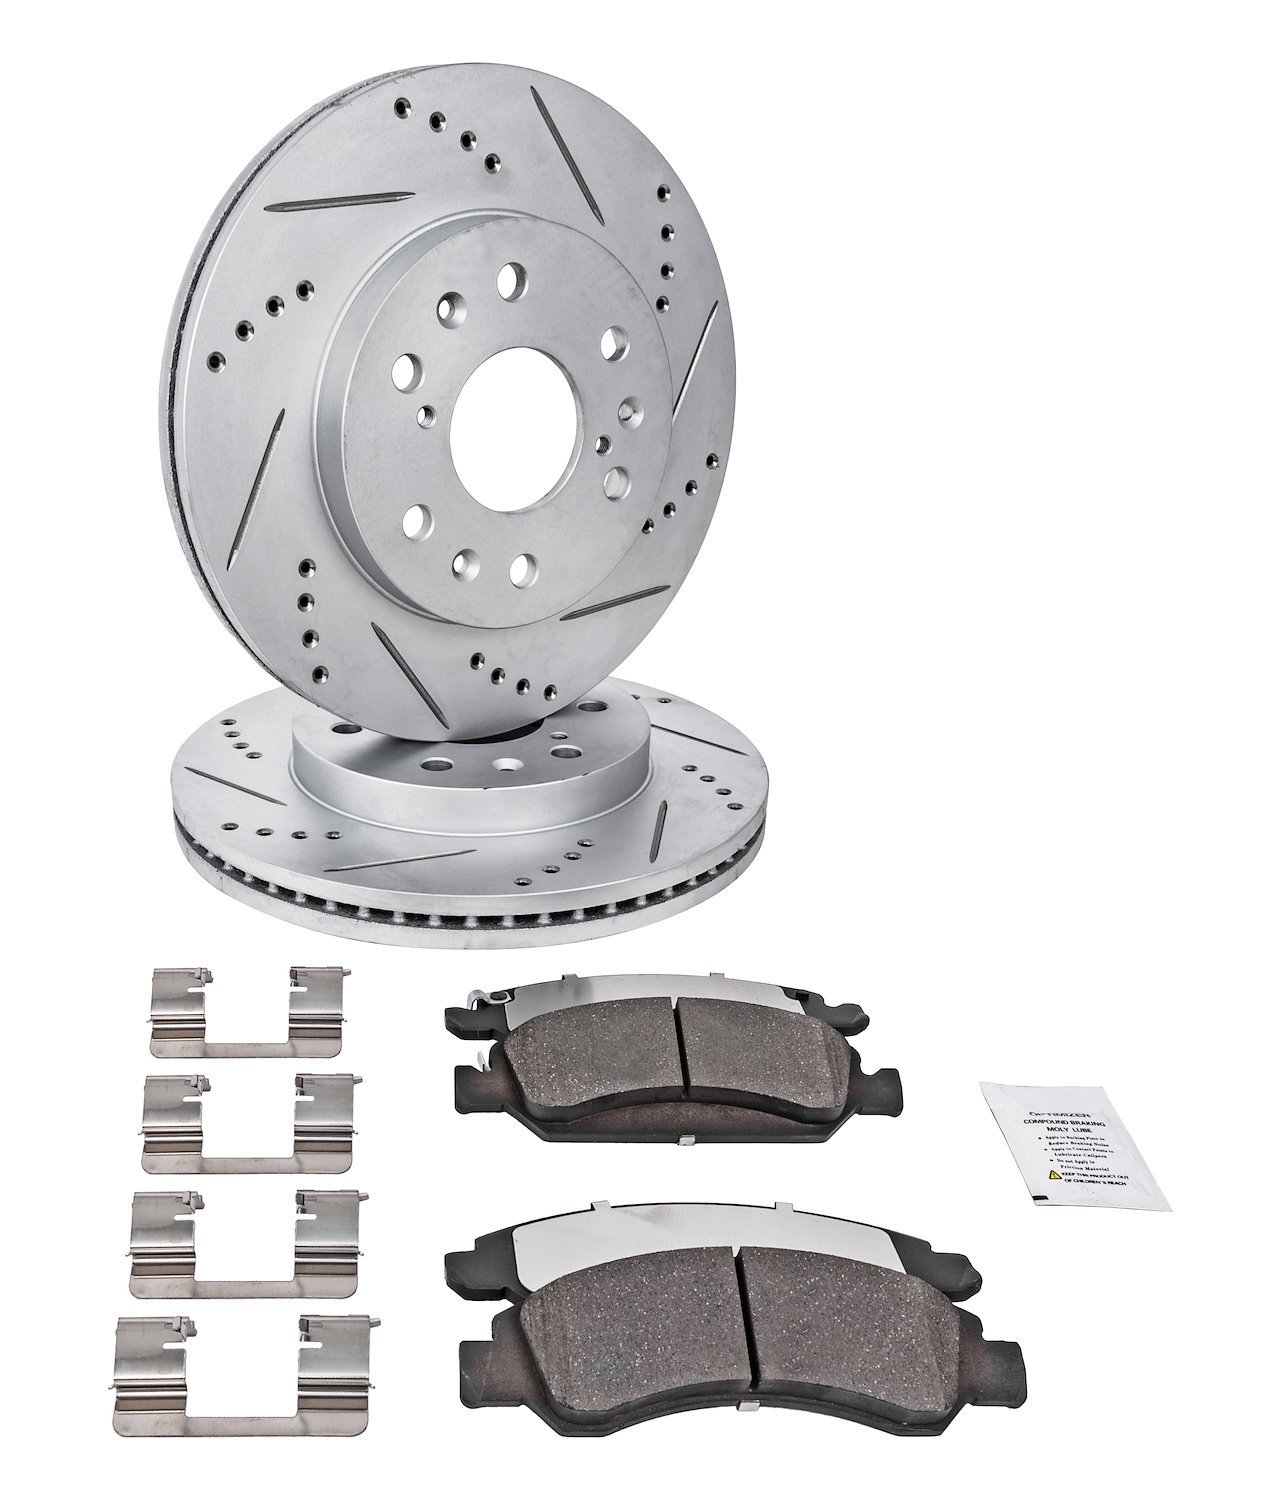 Street Performance JX11 Brake Pads & Rotor Kit Fits Select 2007-2020 Cadillac Escalade, Chevy & GMC 1500 Model Trucks [Front]